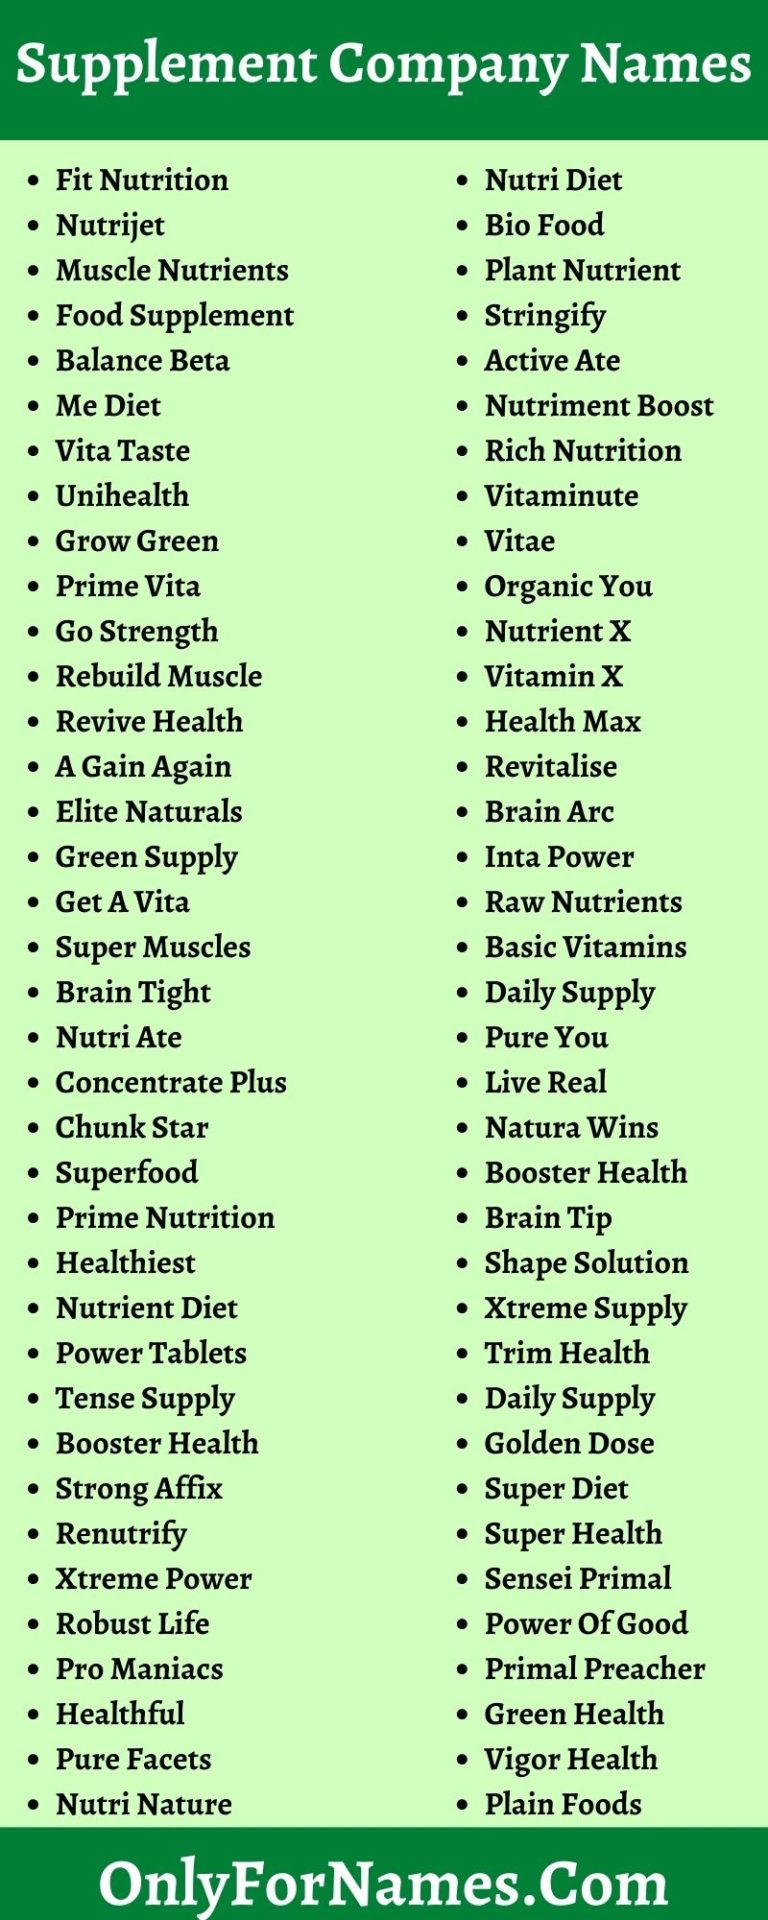 Supplement Company Names: 400+ Nutrition & Vitamin Brand Names